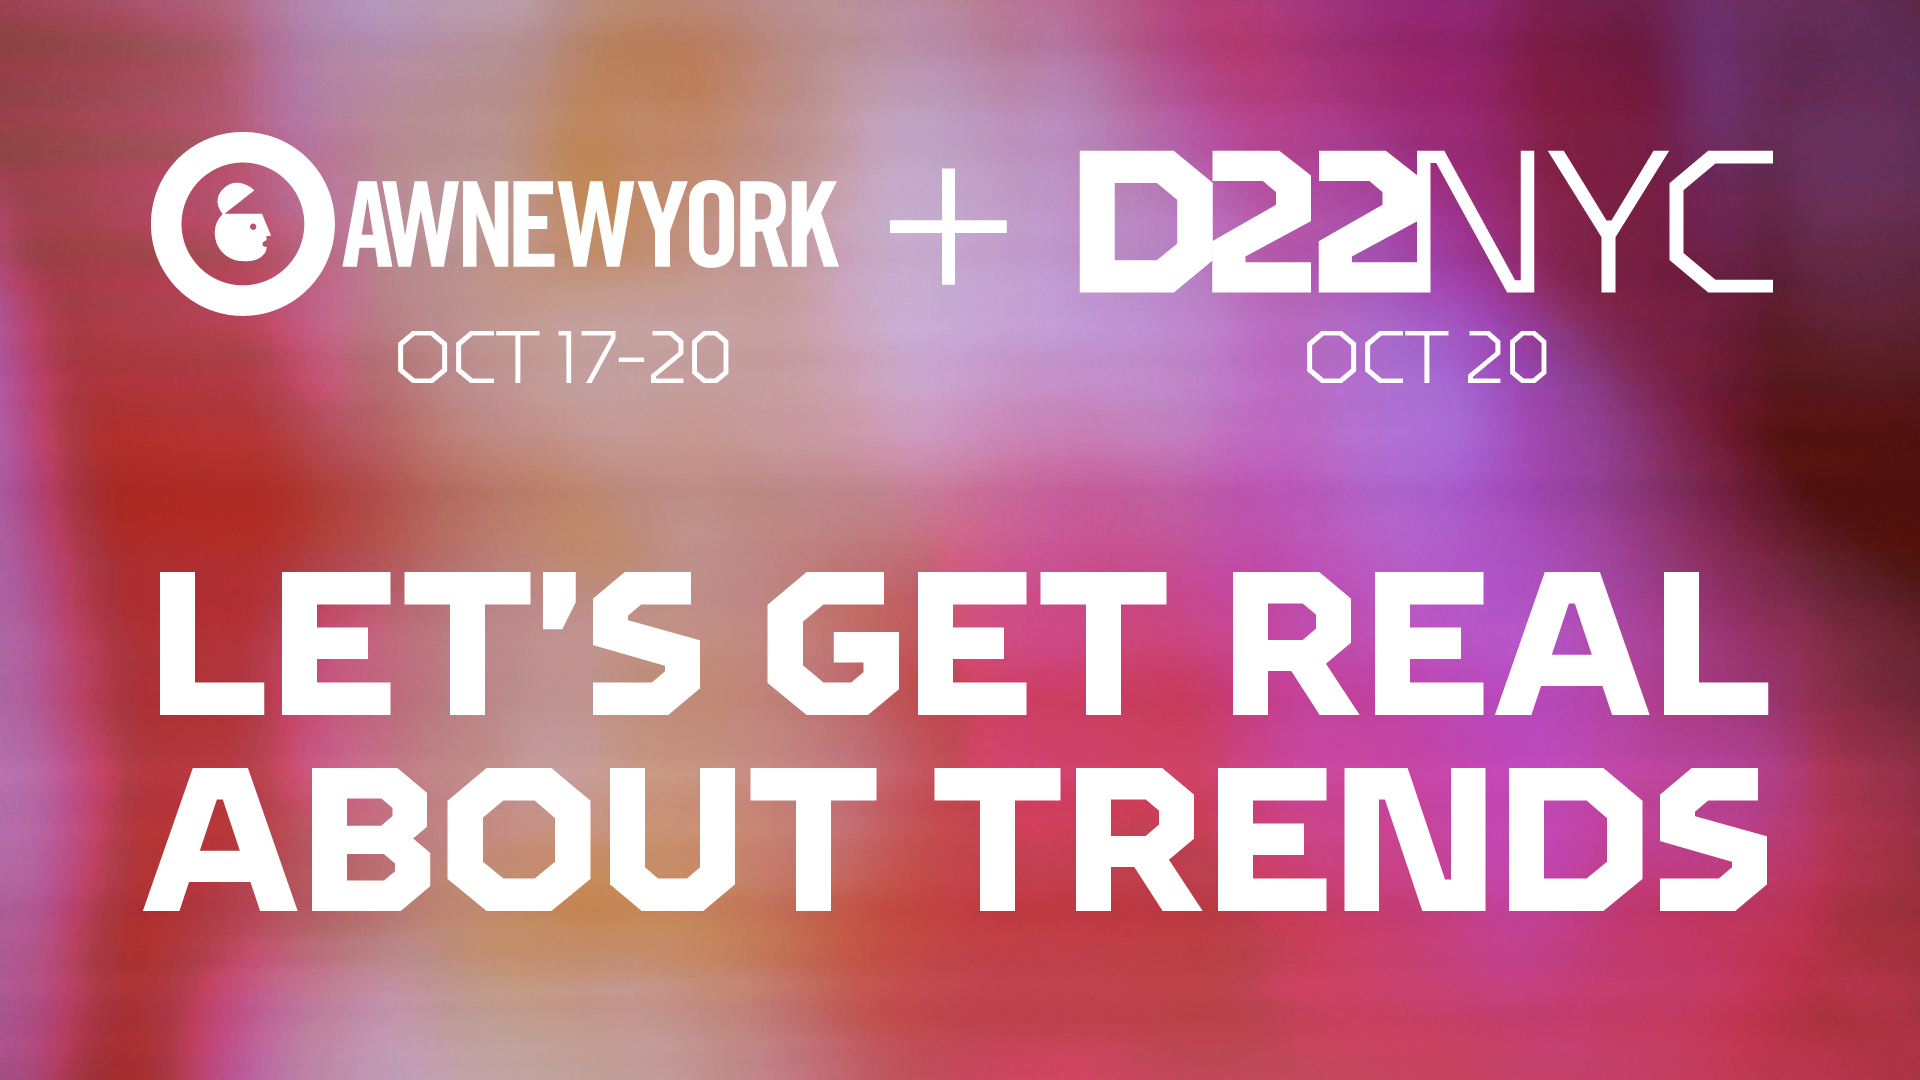 Let’s Get Real About Trends at D22 NYC